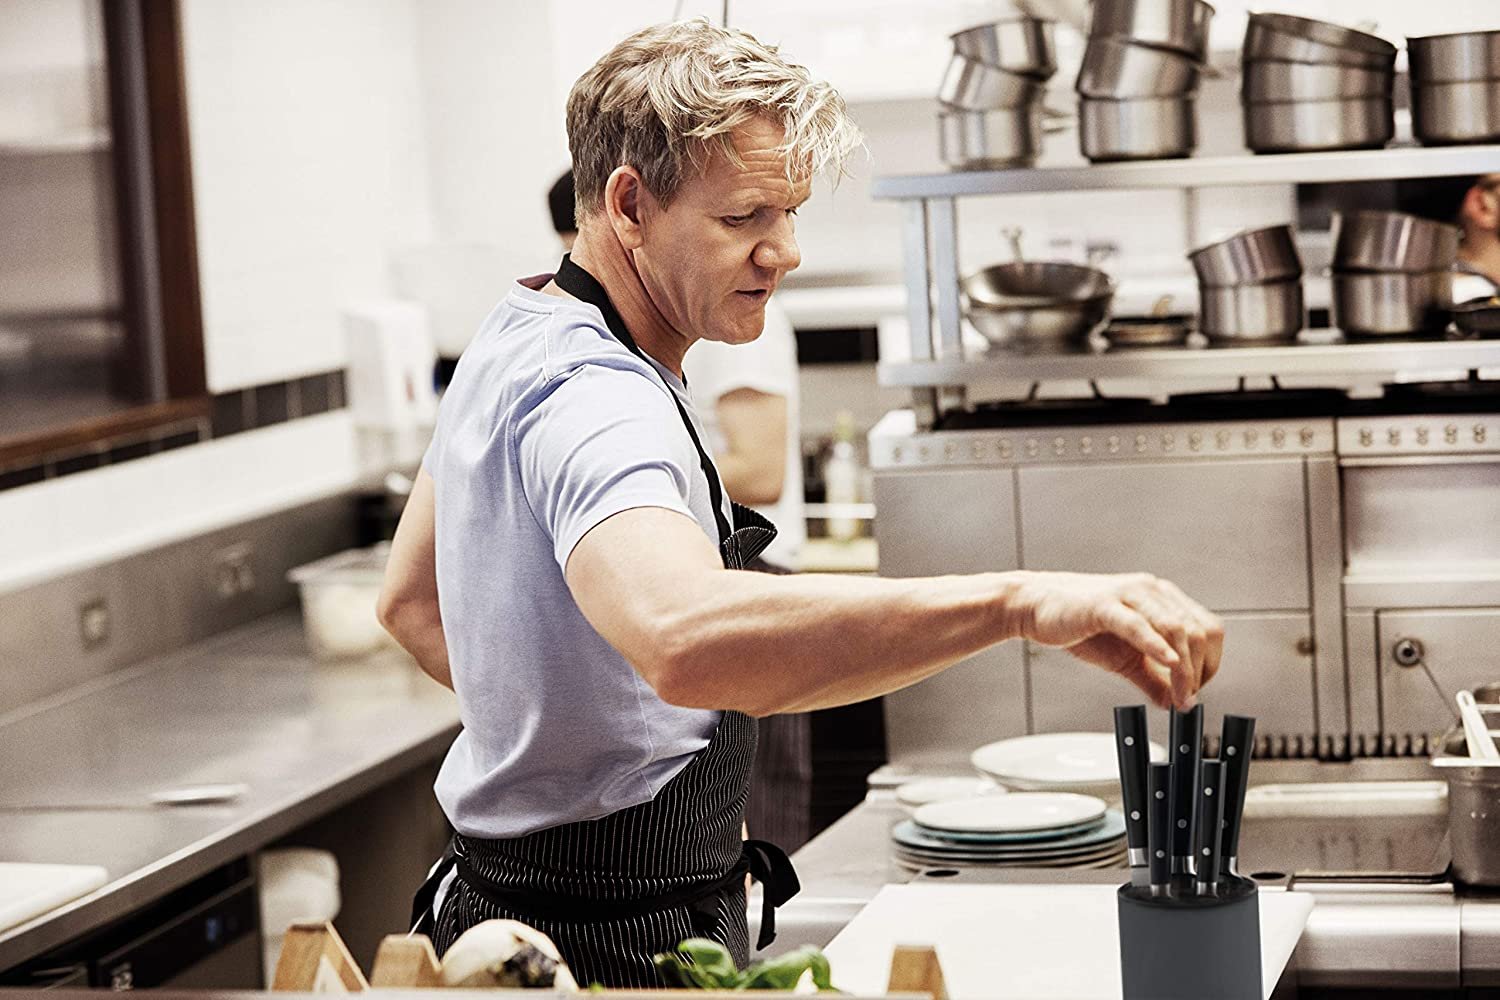 Gordon Ramsay's Kitchen Kit  What You Need To Be A Better Chef 